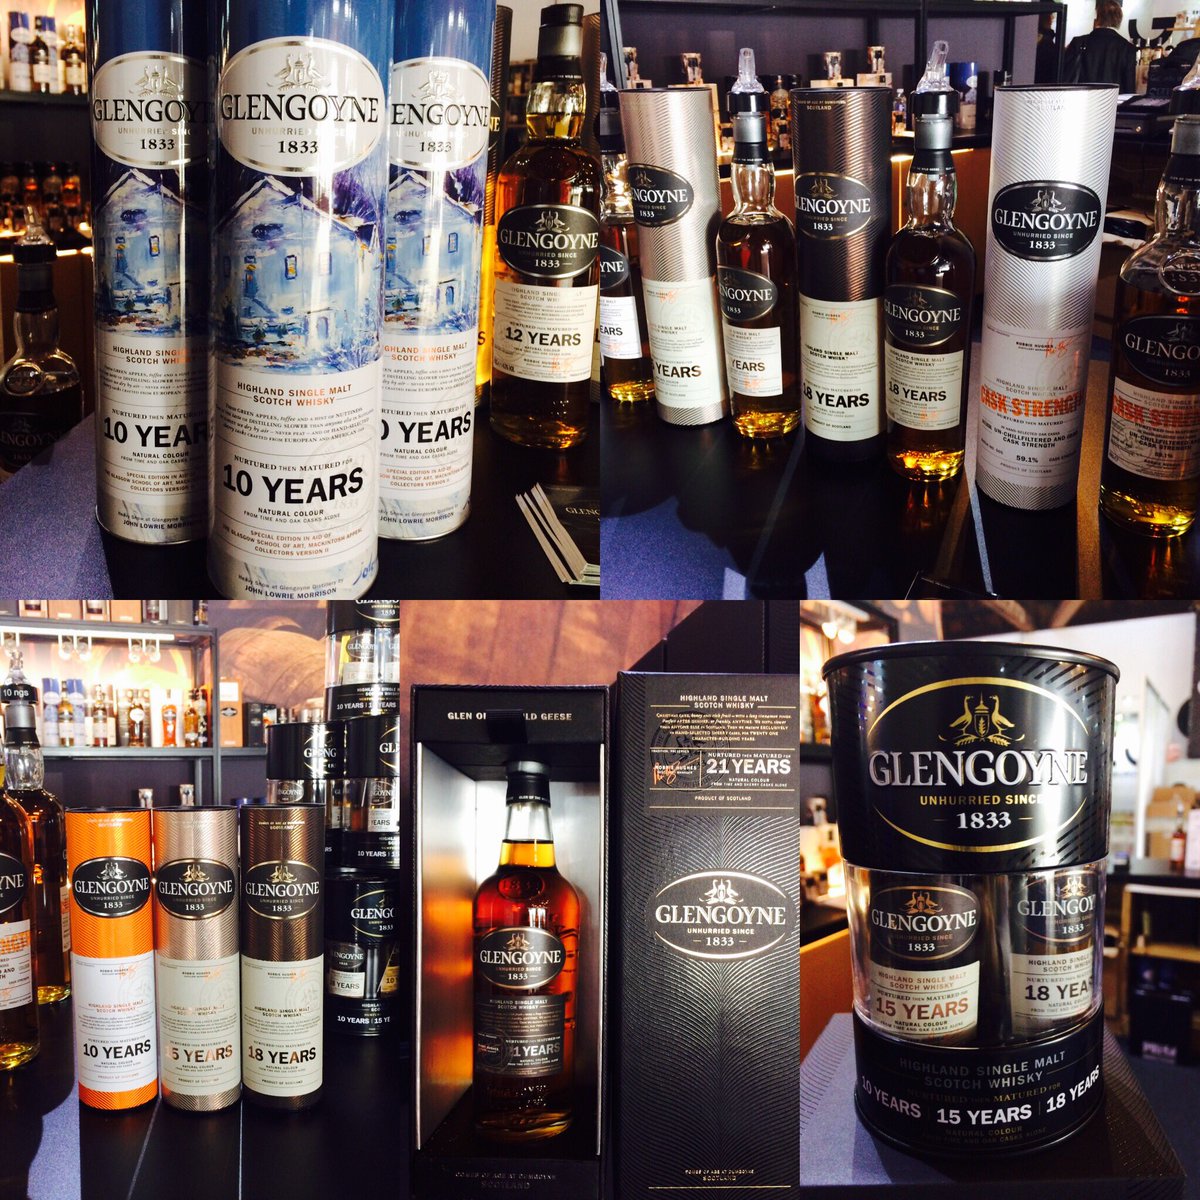 The most amazing array of @Glengoyne Christmas gifts available today at @TasteofLondon. Visit stand V07 #christmas #gifts #whisky #malt